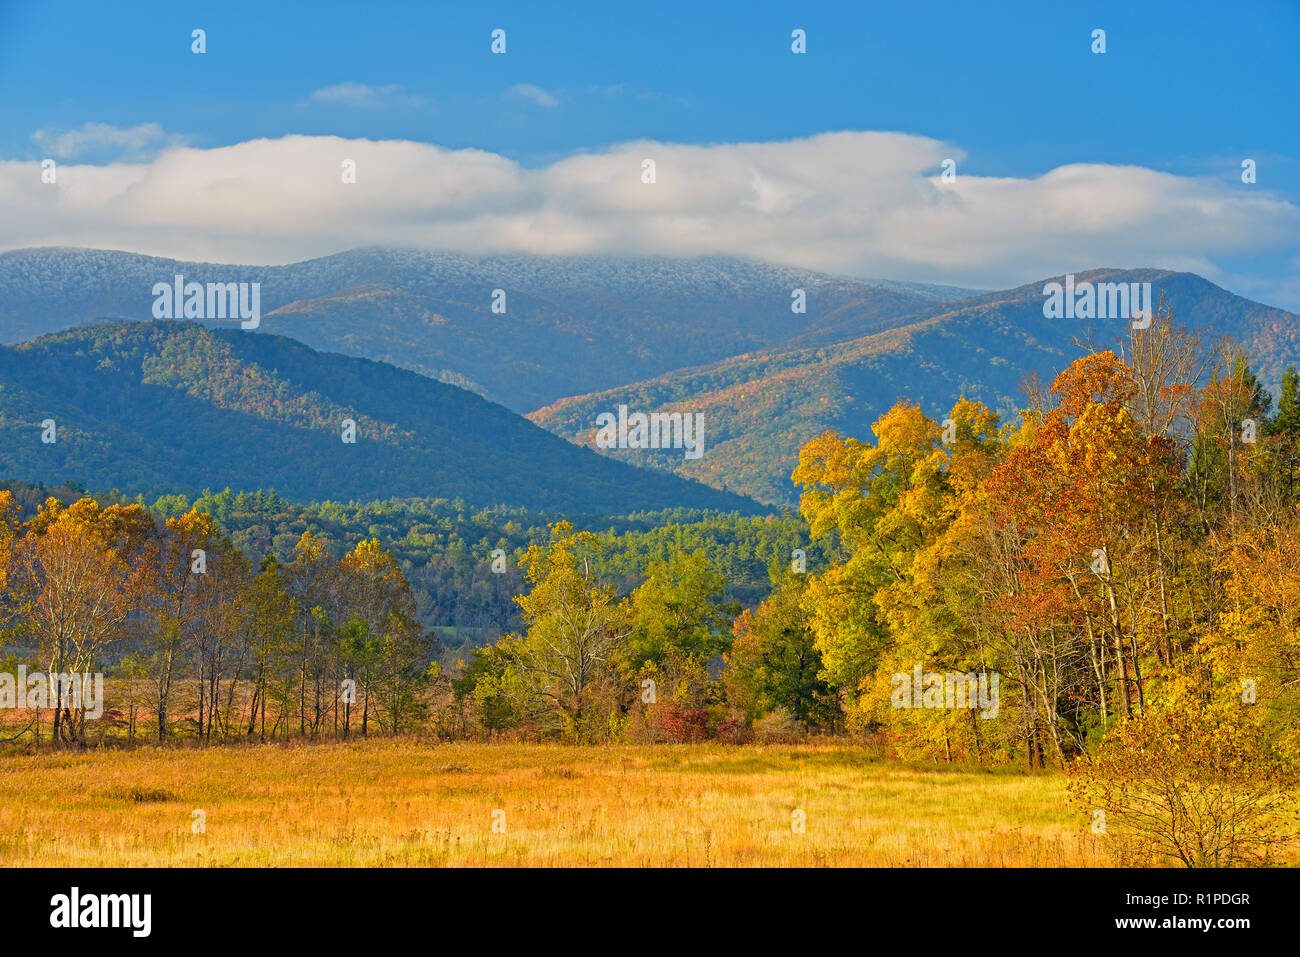 Early autumn foliage in Cades Cove, Great Smoky Mountains National Park, Tennessee, USA Stock Photo